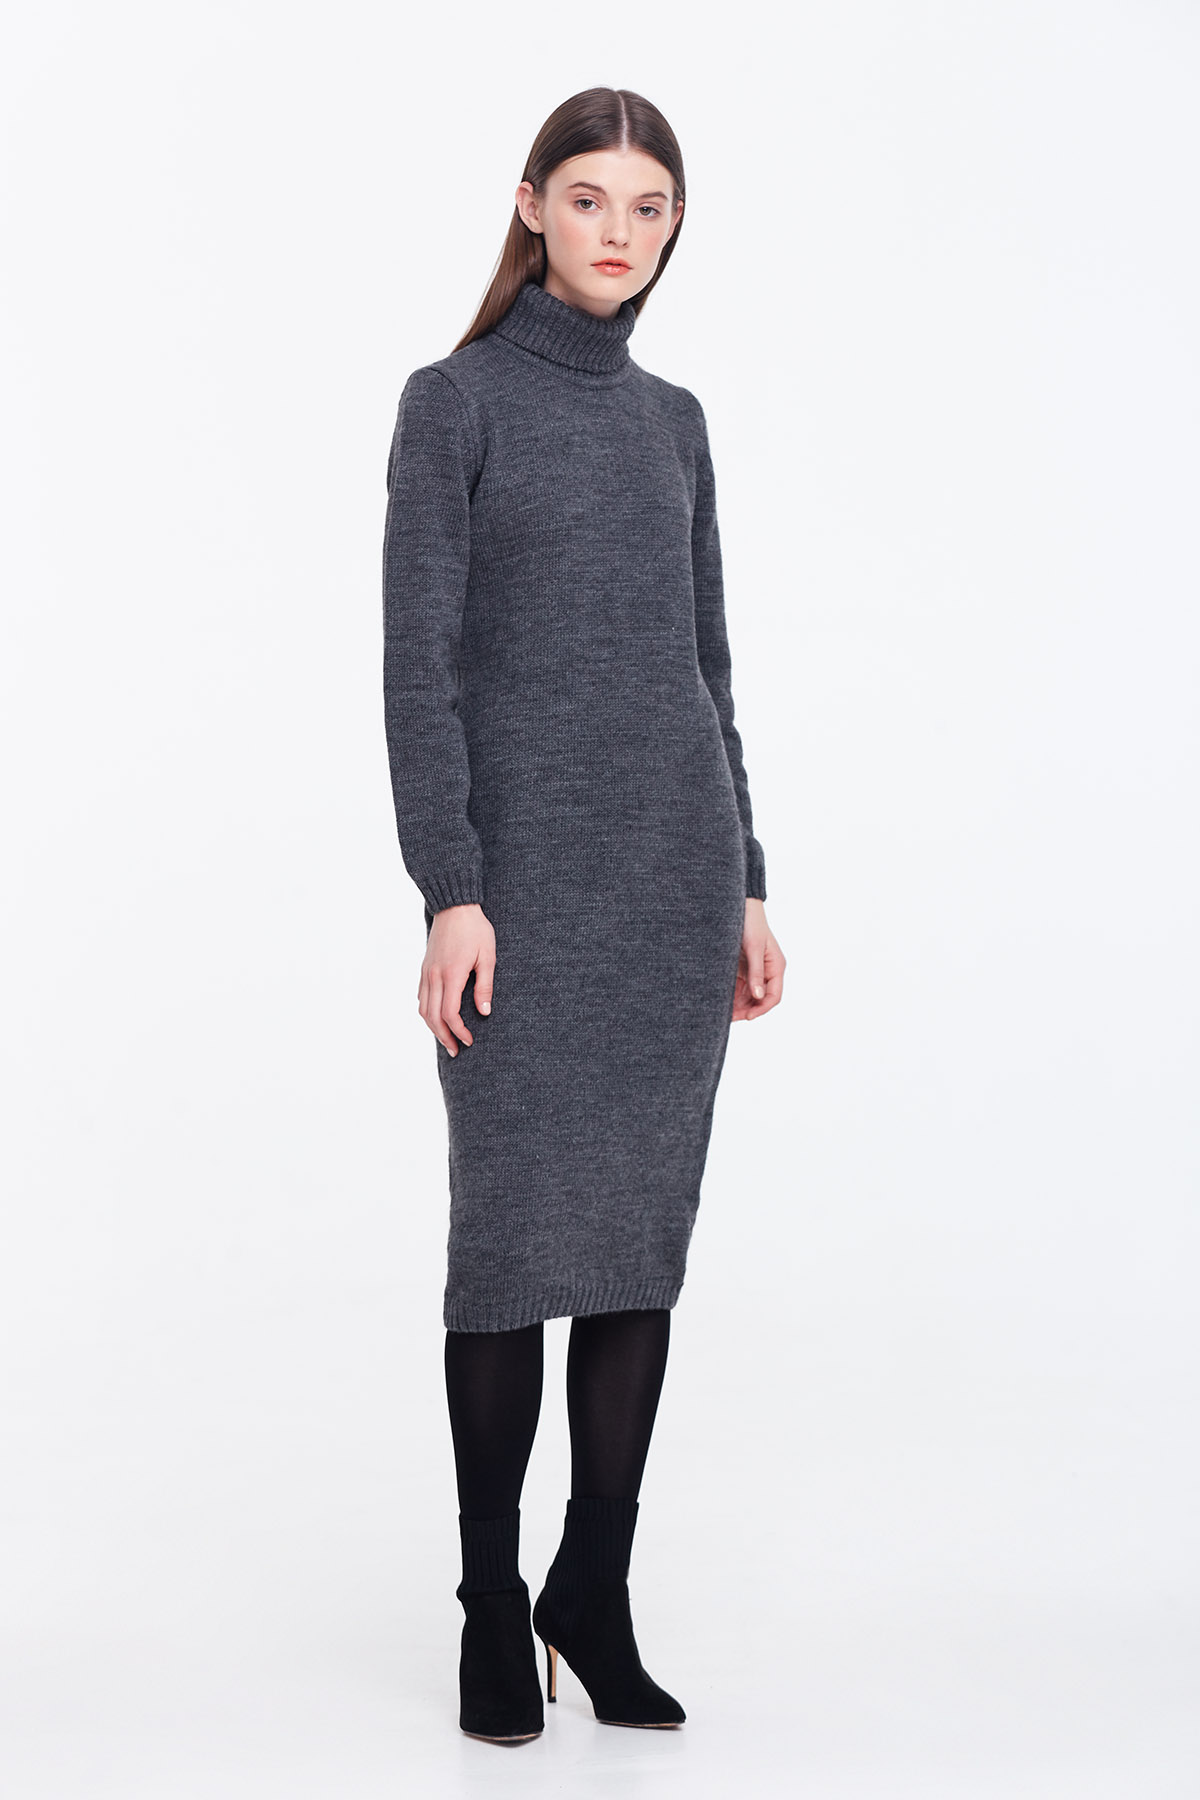 Grey knit dress with a stand up collar, photo 3